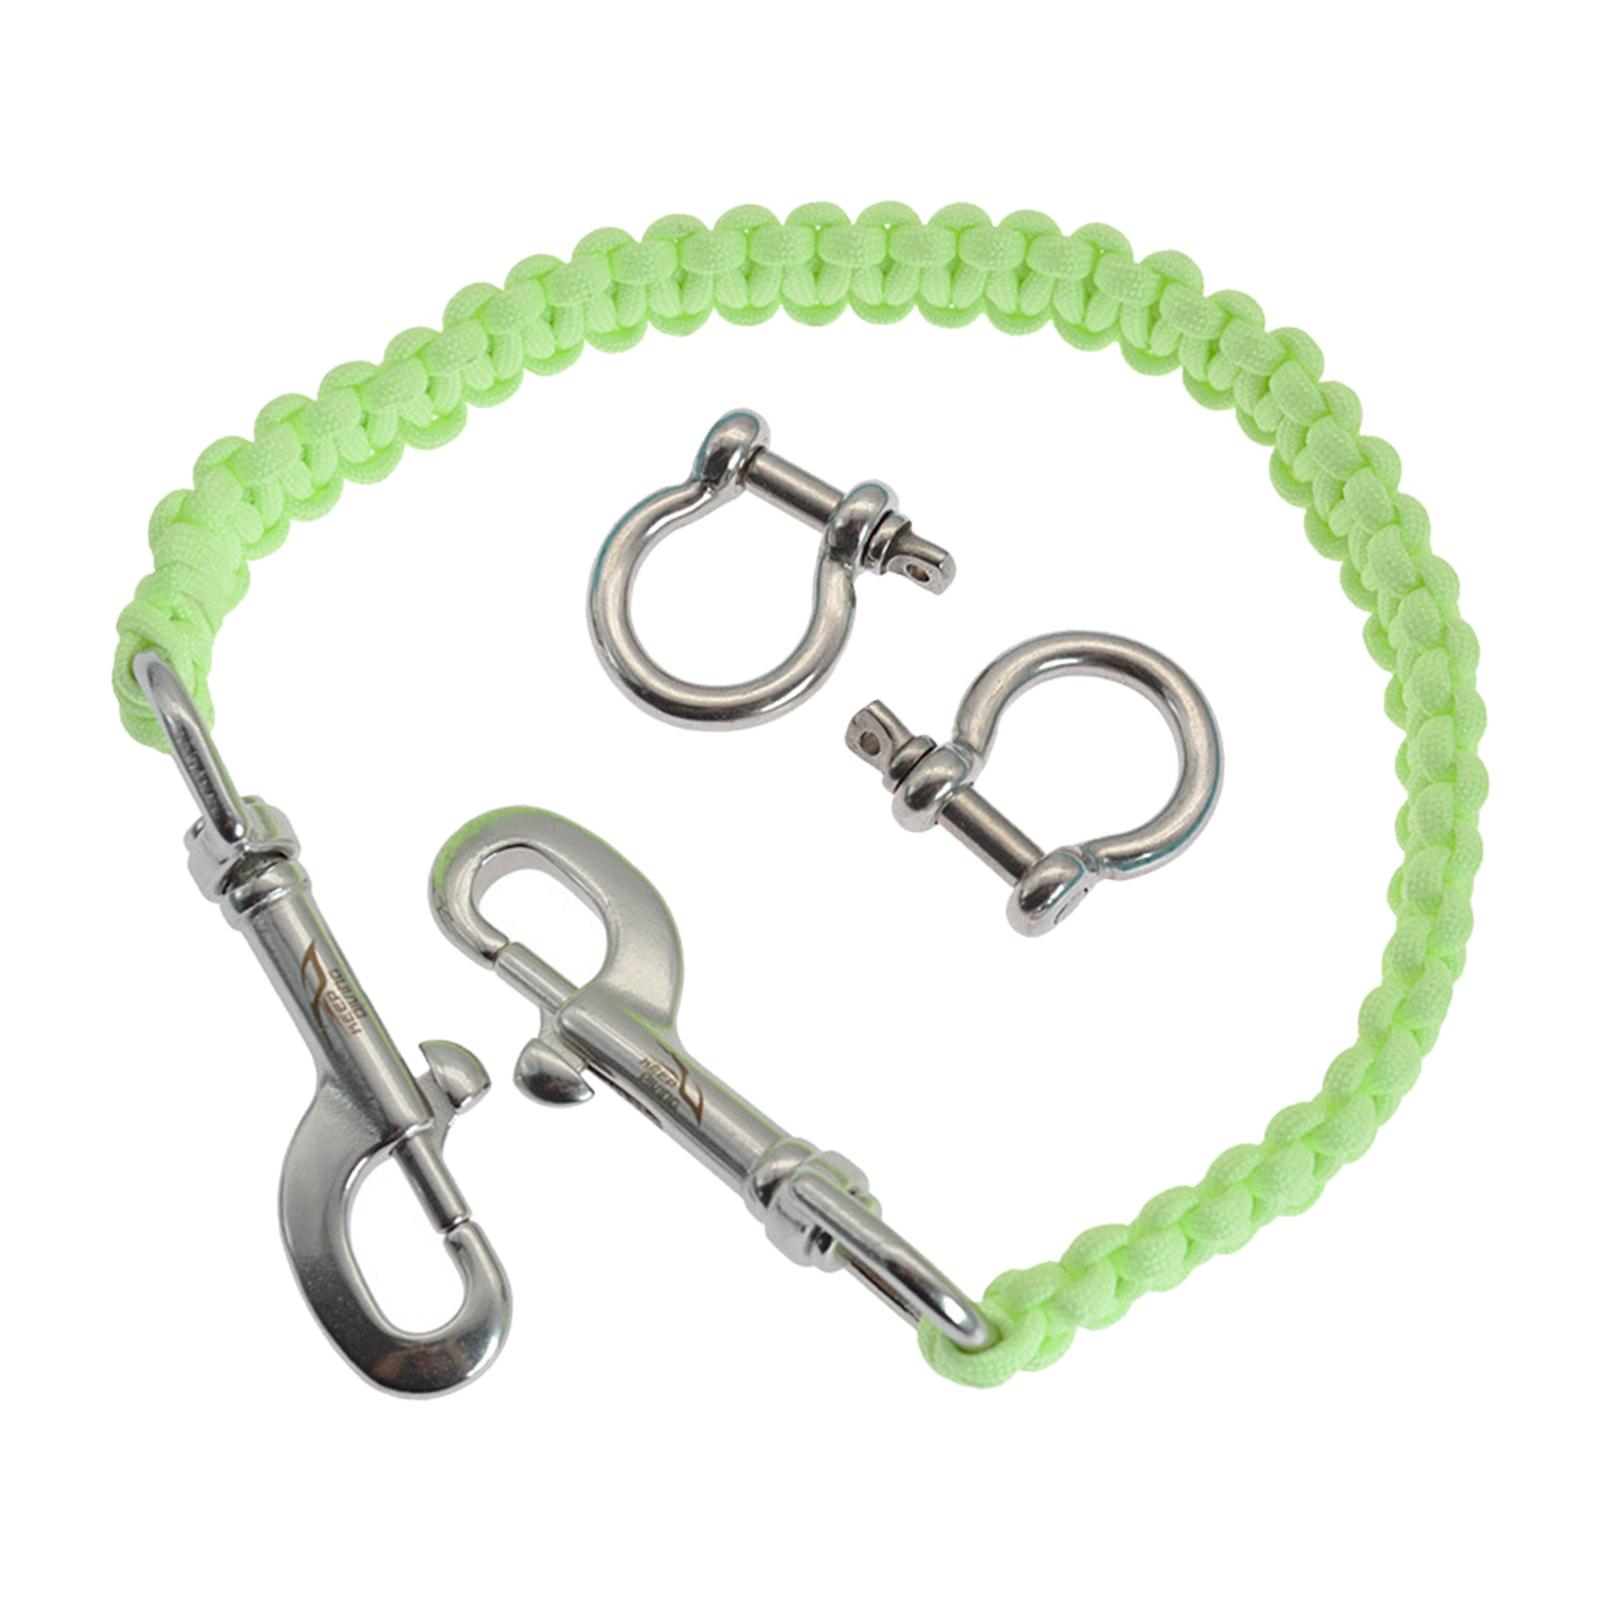 Diving Camera Hand Rope Lanyard Strap Underwater Photography Accessories light green